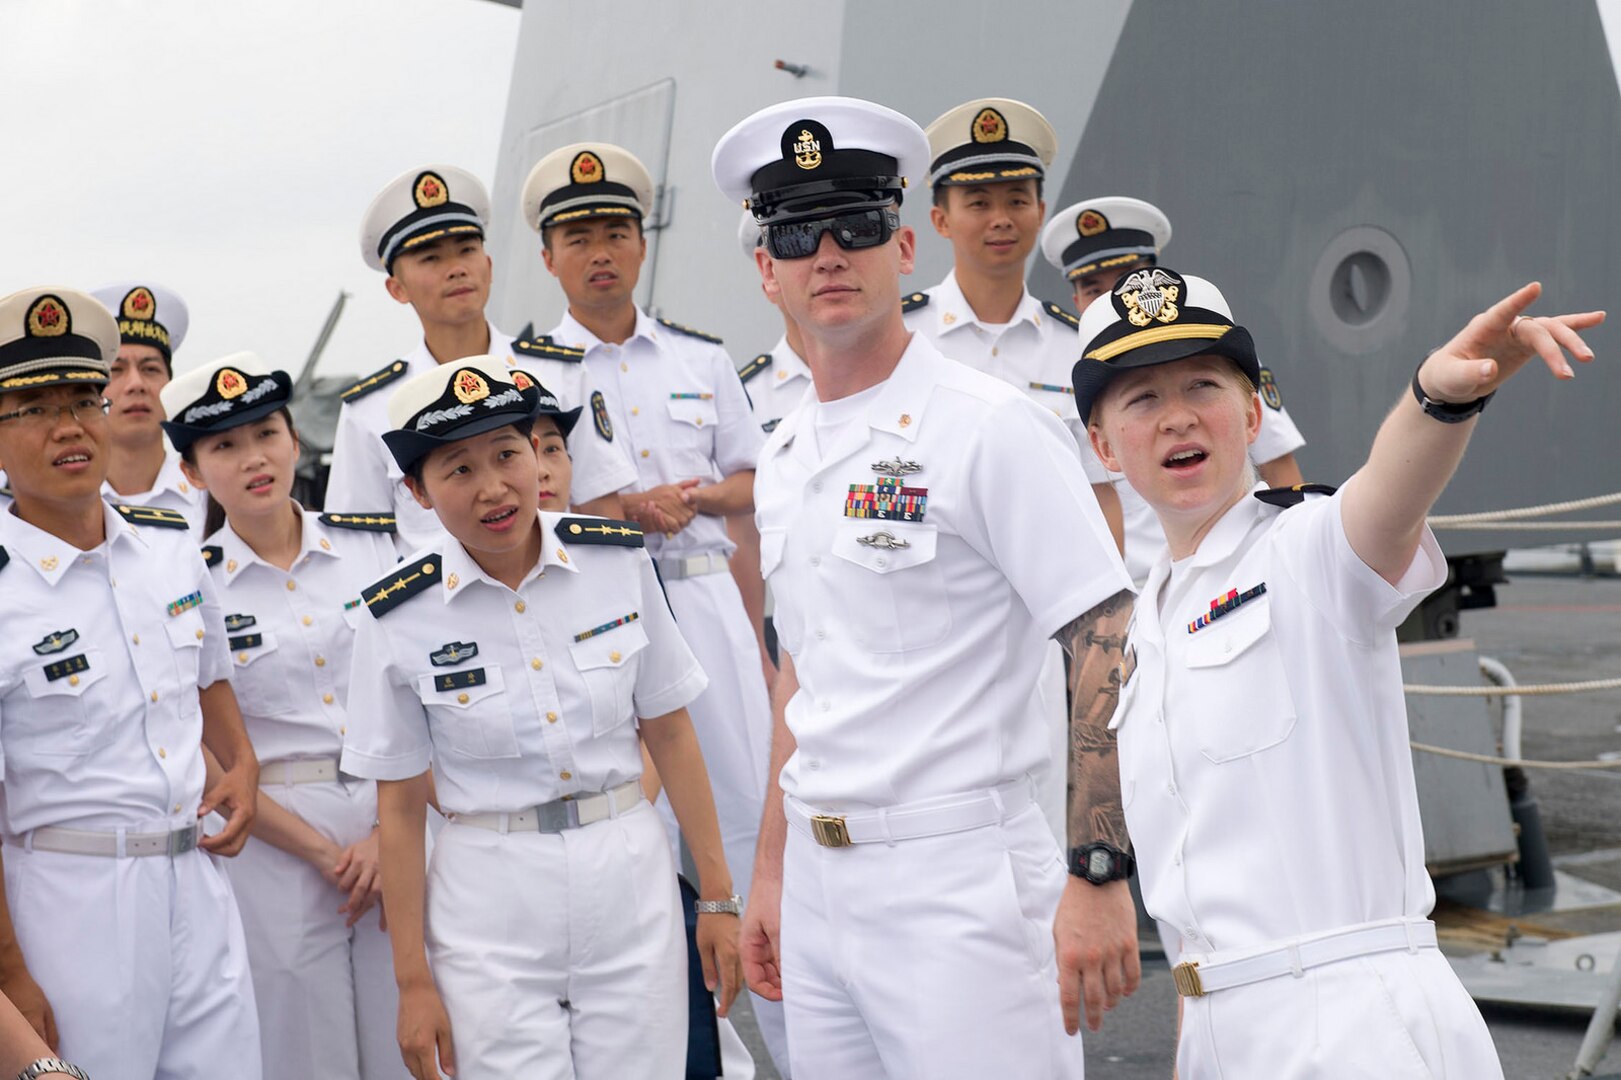 Ensign Deborah Mullen, assigned to Arleigh Burke-class guided-missile destroyer USS Sterett (DDG 104), speaks to a People's Liberation Army (Navy) (PLAN) tour group during a scheduled port visit to Zhanjiang, China, June 14, 2017. Sterett is part of the Sterett-Dewey Surface Action Group and is the third deploying group operating under the command and control construct called 3rd Fleet Forward.